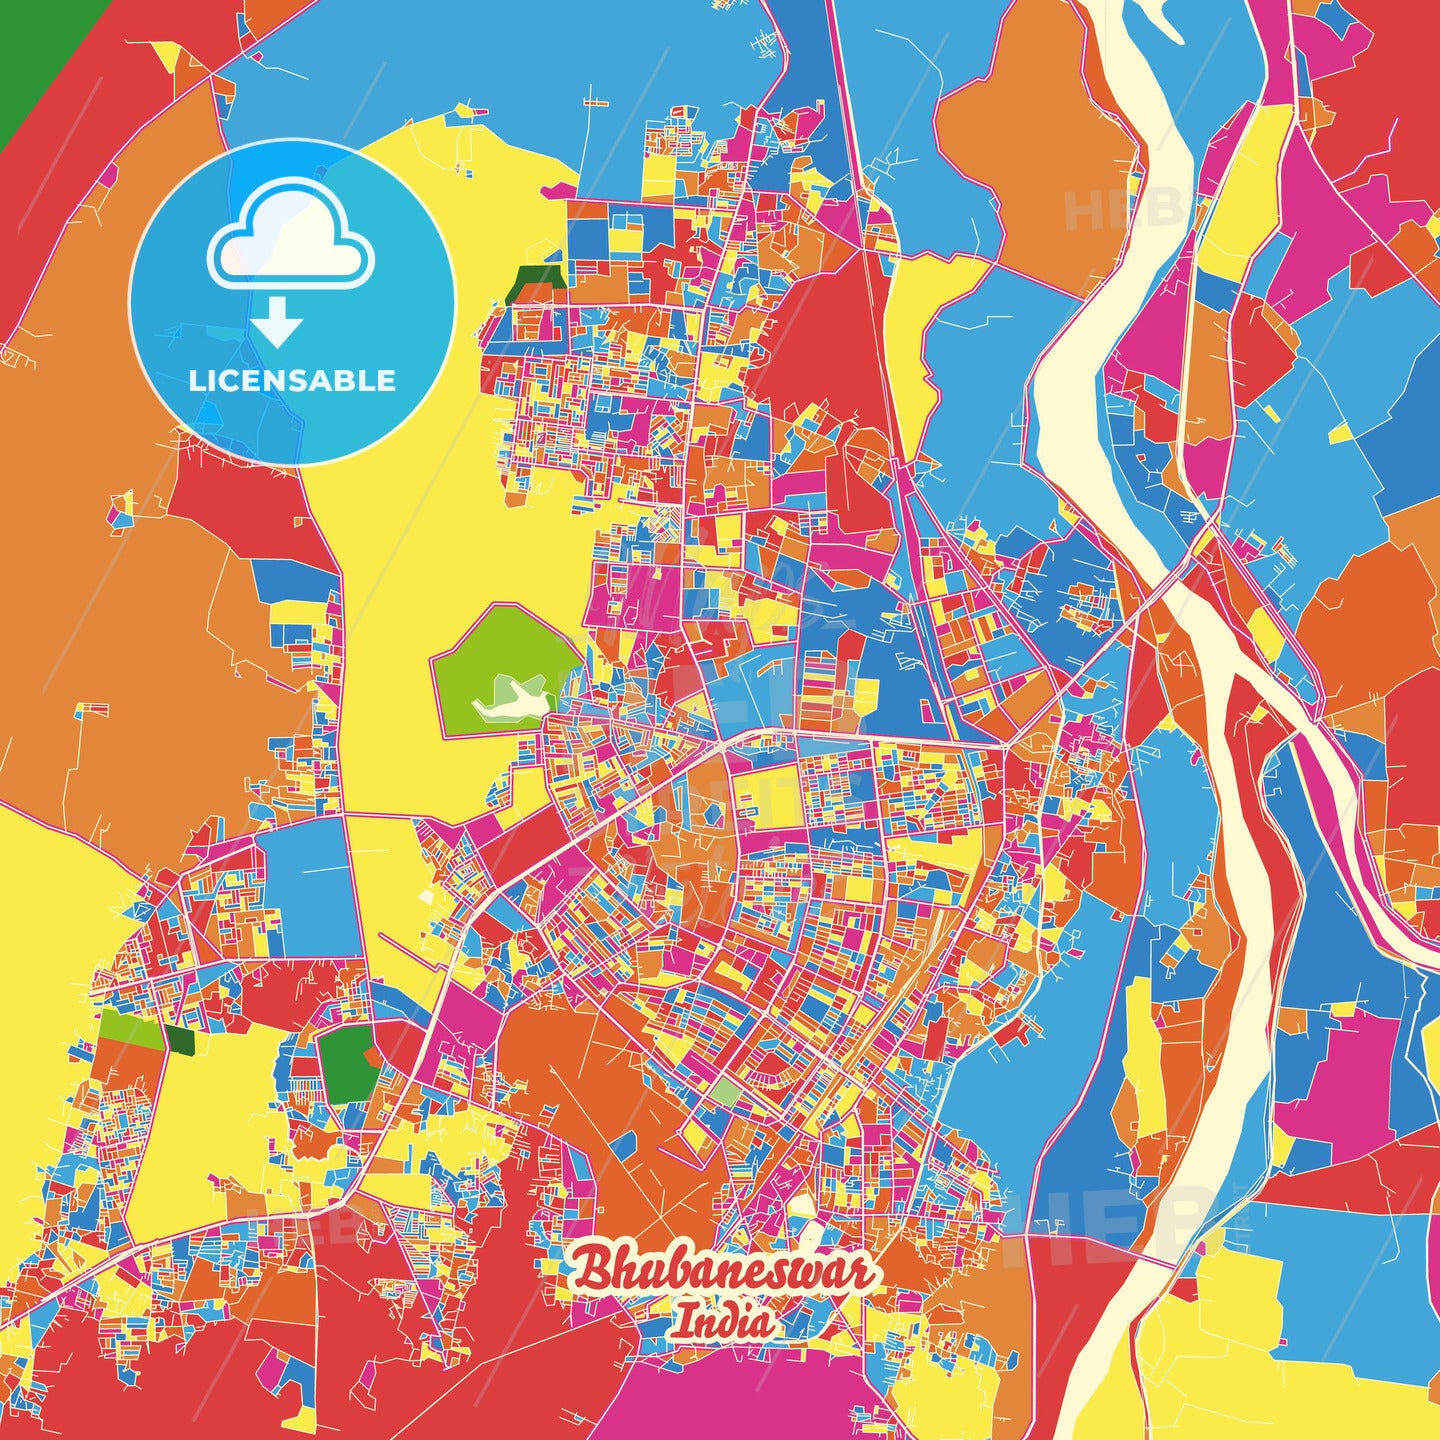 Bhubaneswar, India Crazy Colorful Street Map Poster Template - HEBSTREITS Sketches